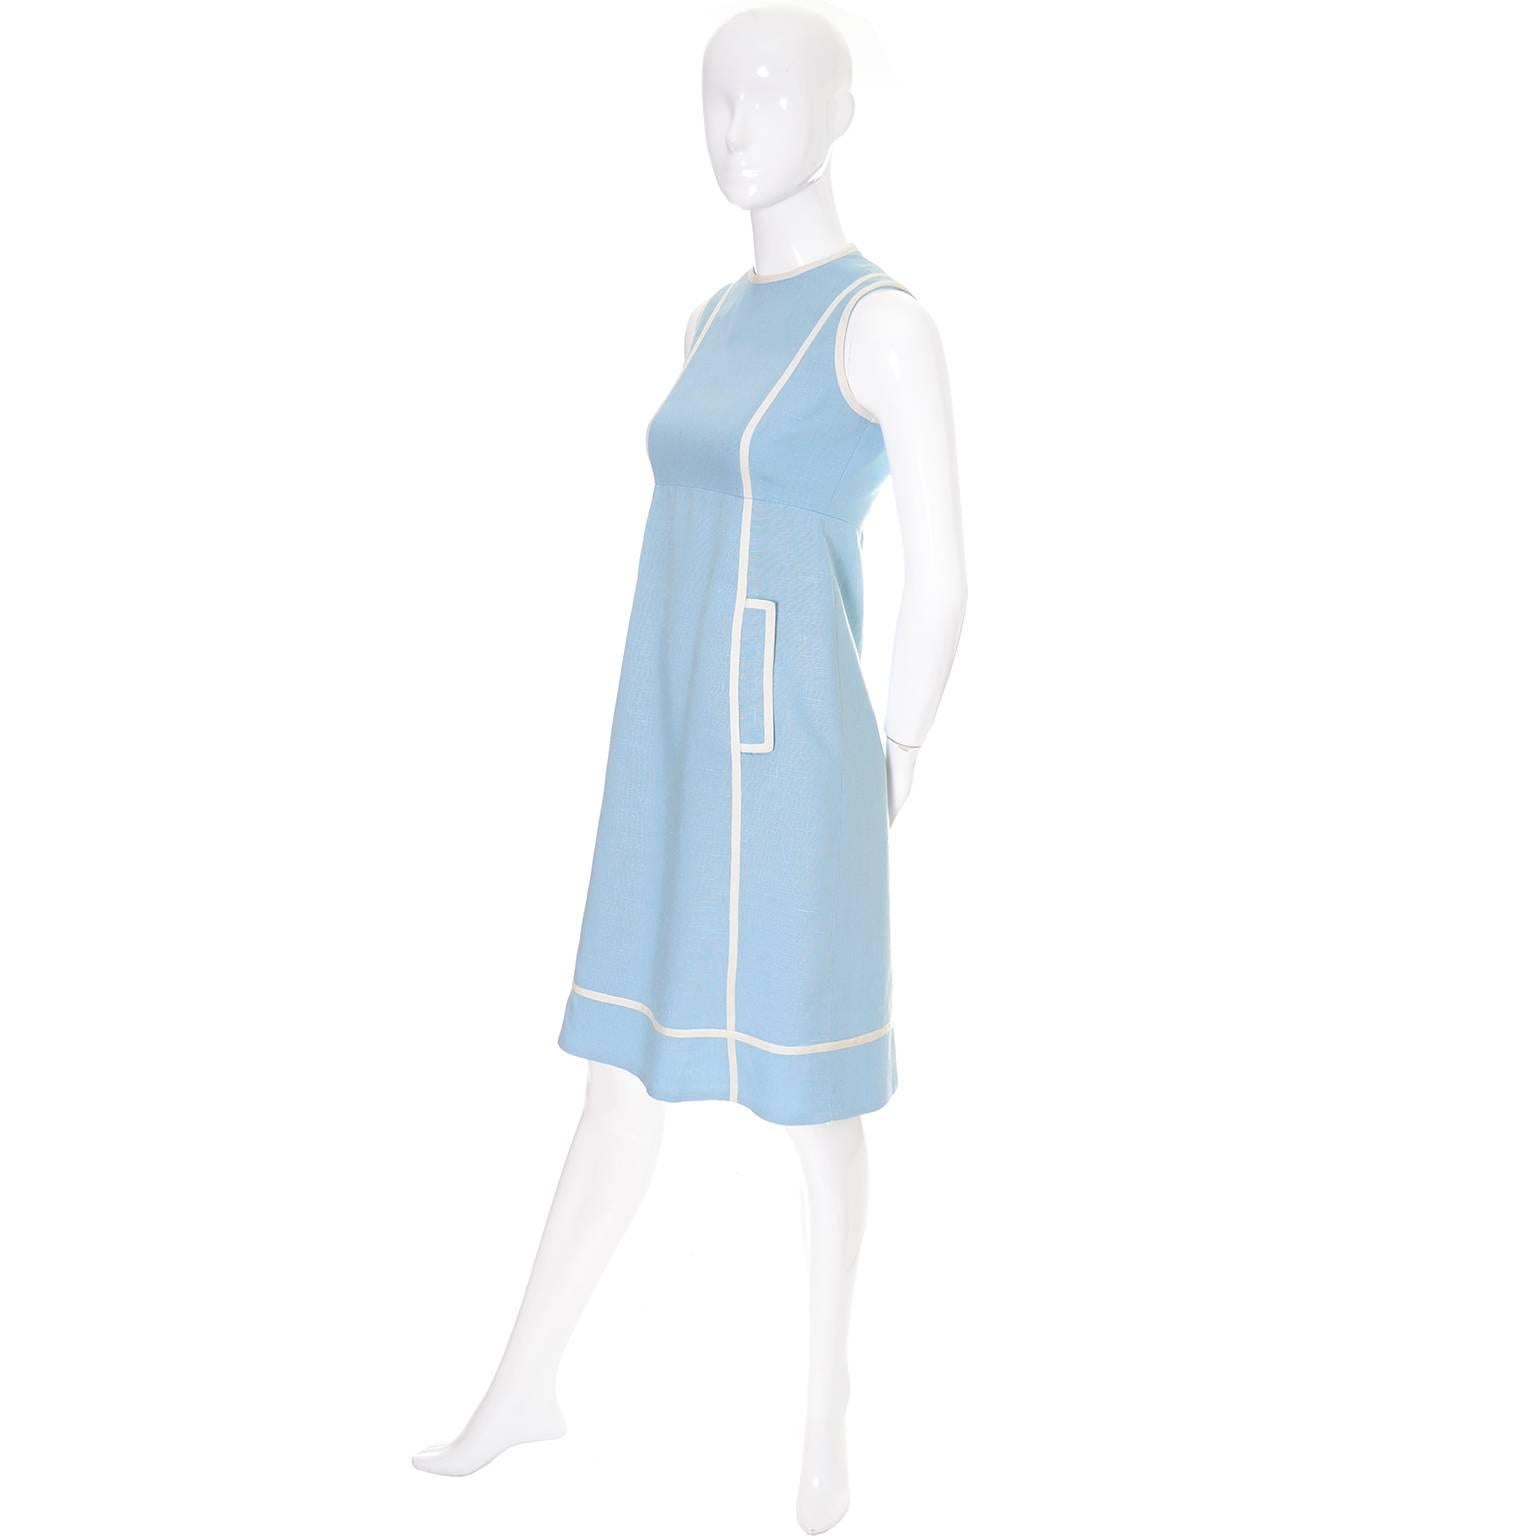 This is a beautiful, classic, 1960's vintage blue linen sleeveless dress designed by Geoffrey Beene. The dress was purchased at the department store Meier and Frank in Portland, Oregon in their high end 